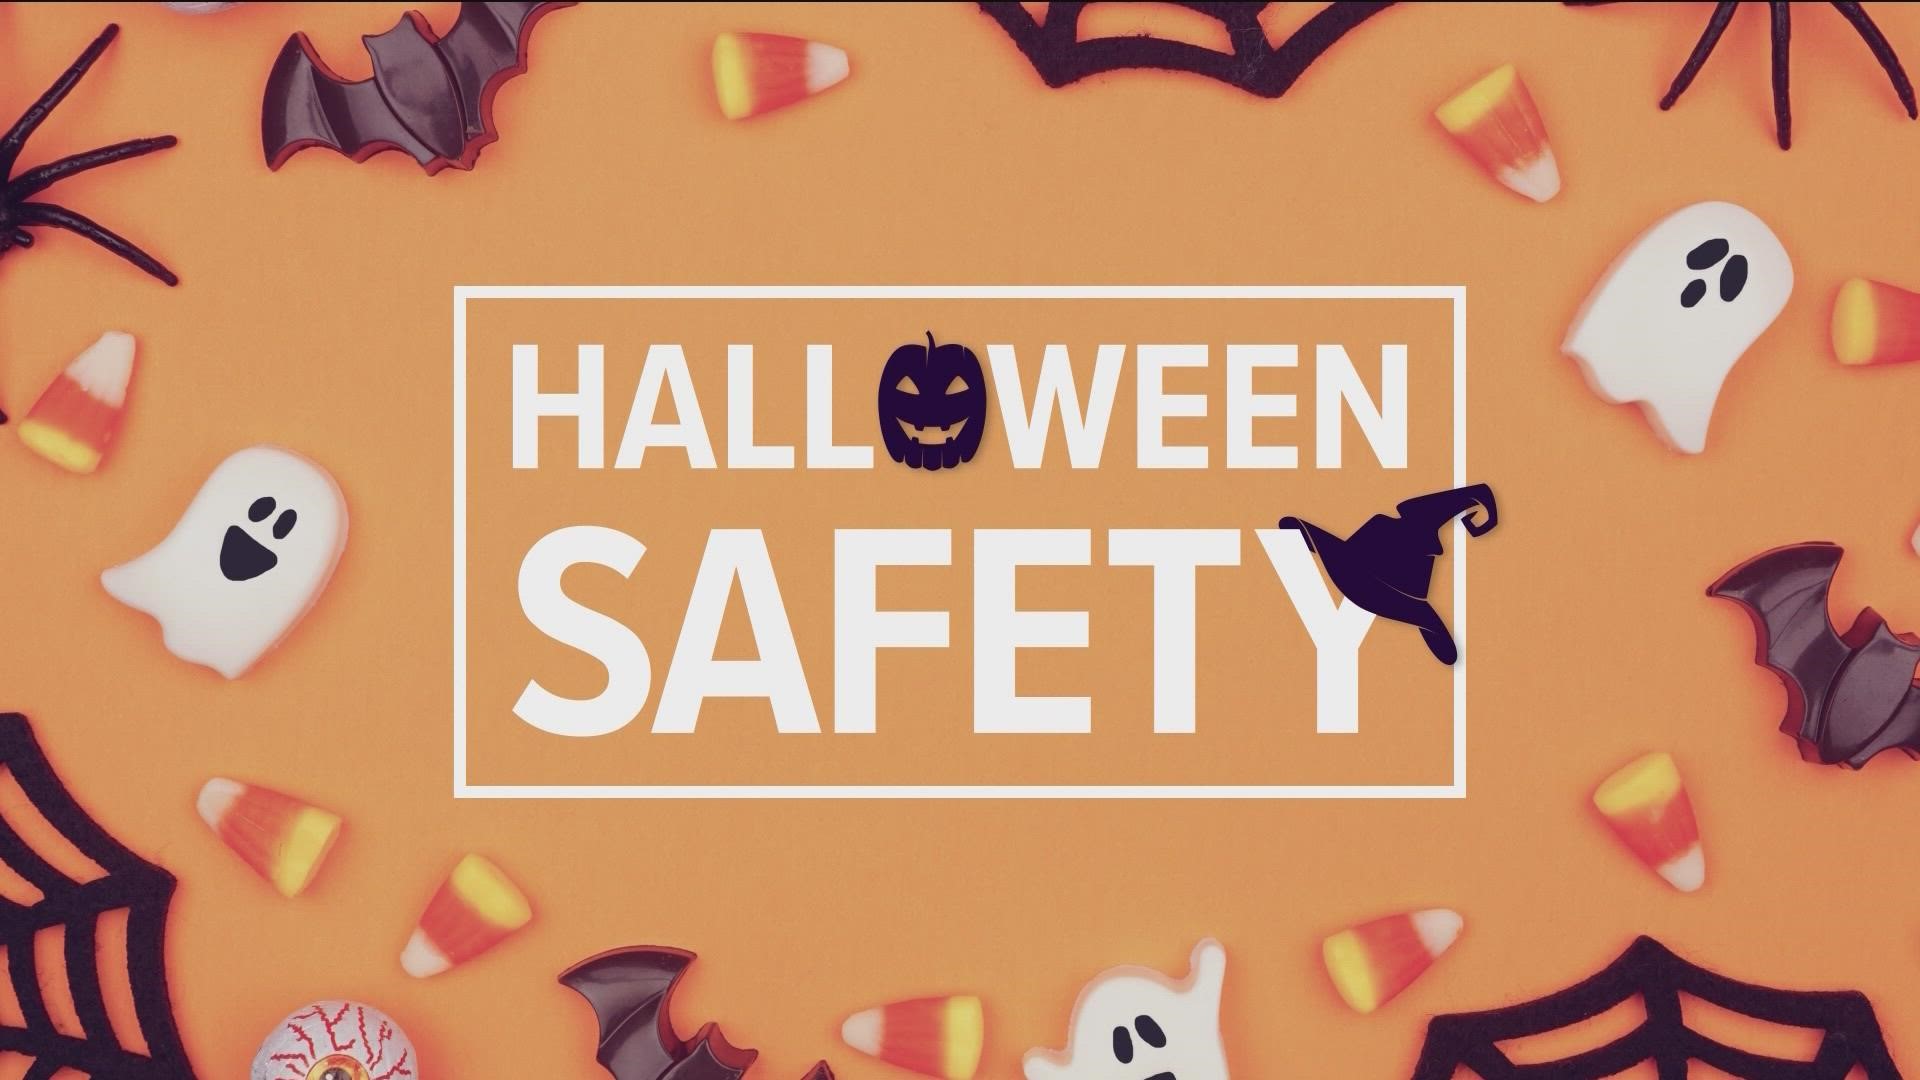 Halloween brings its share of spooky events and scary movies, but it also brings something much more lethal. Pedestrian deaths are common on Halloween.